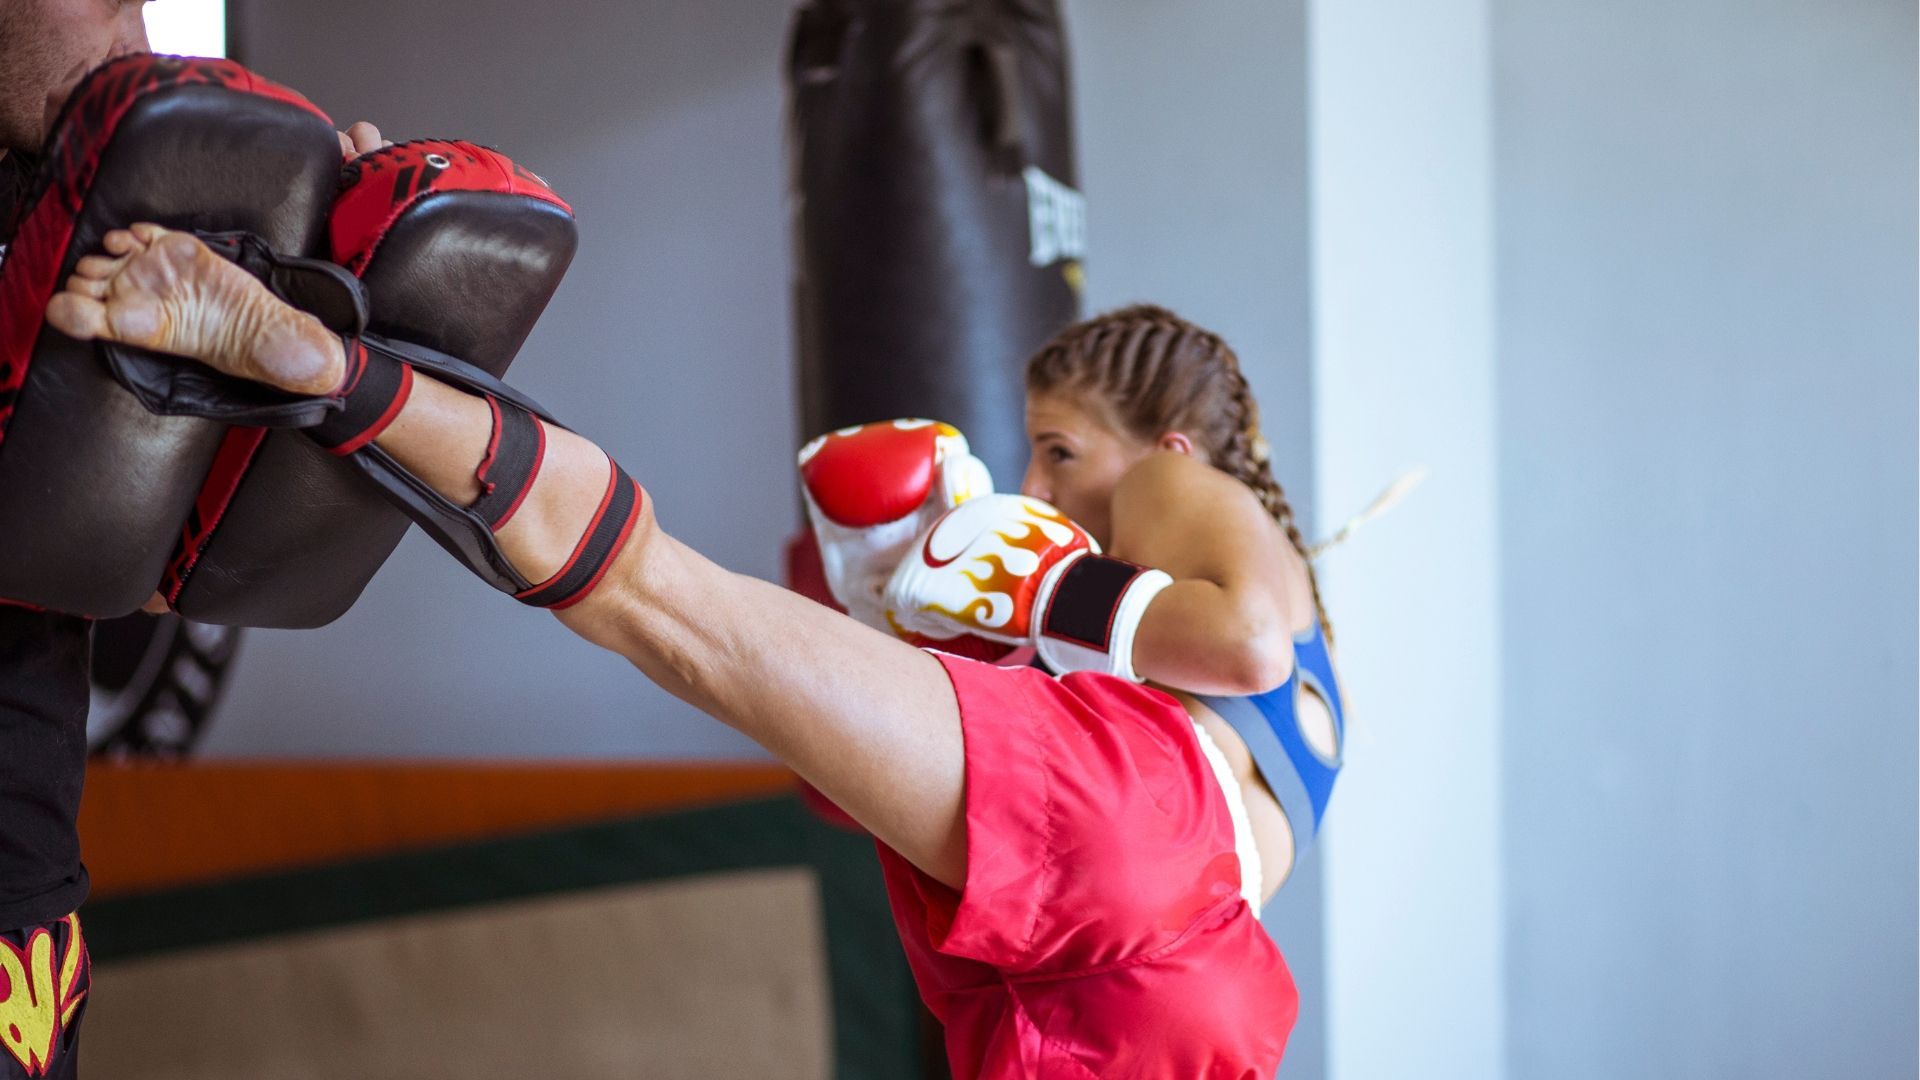 A woman at a Kickboxing Class executing a well-timed kick on a piece of equipment.